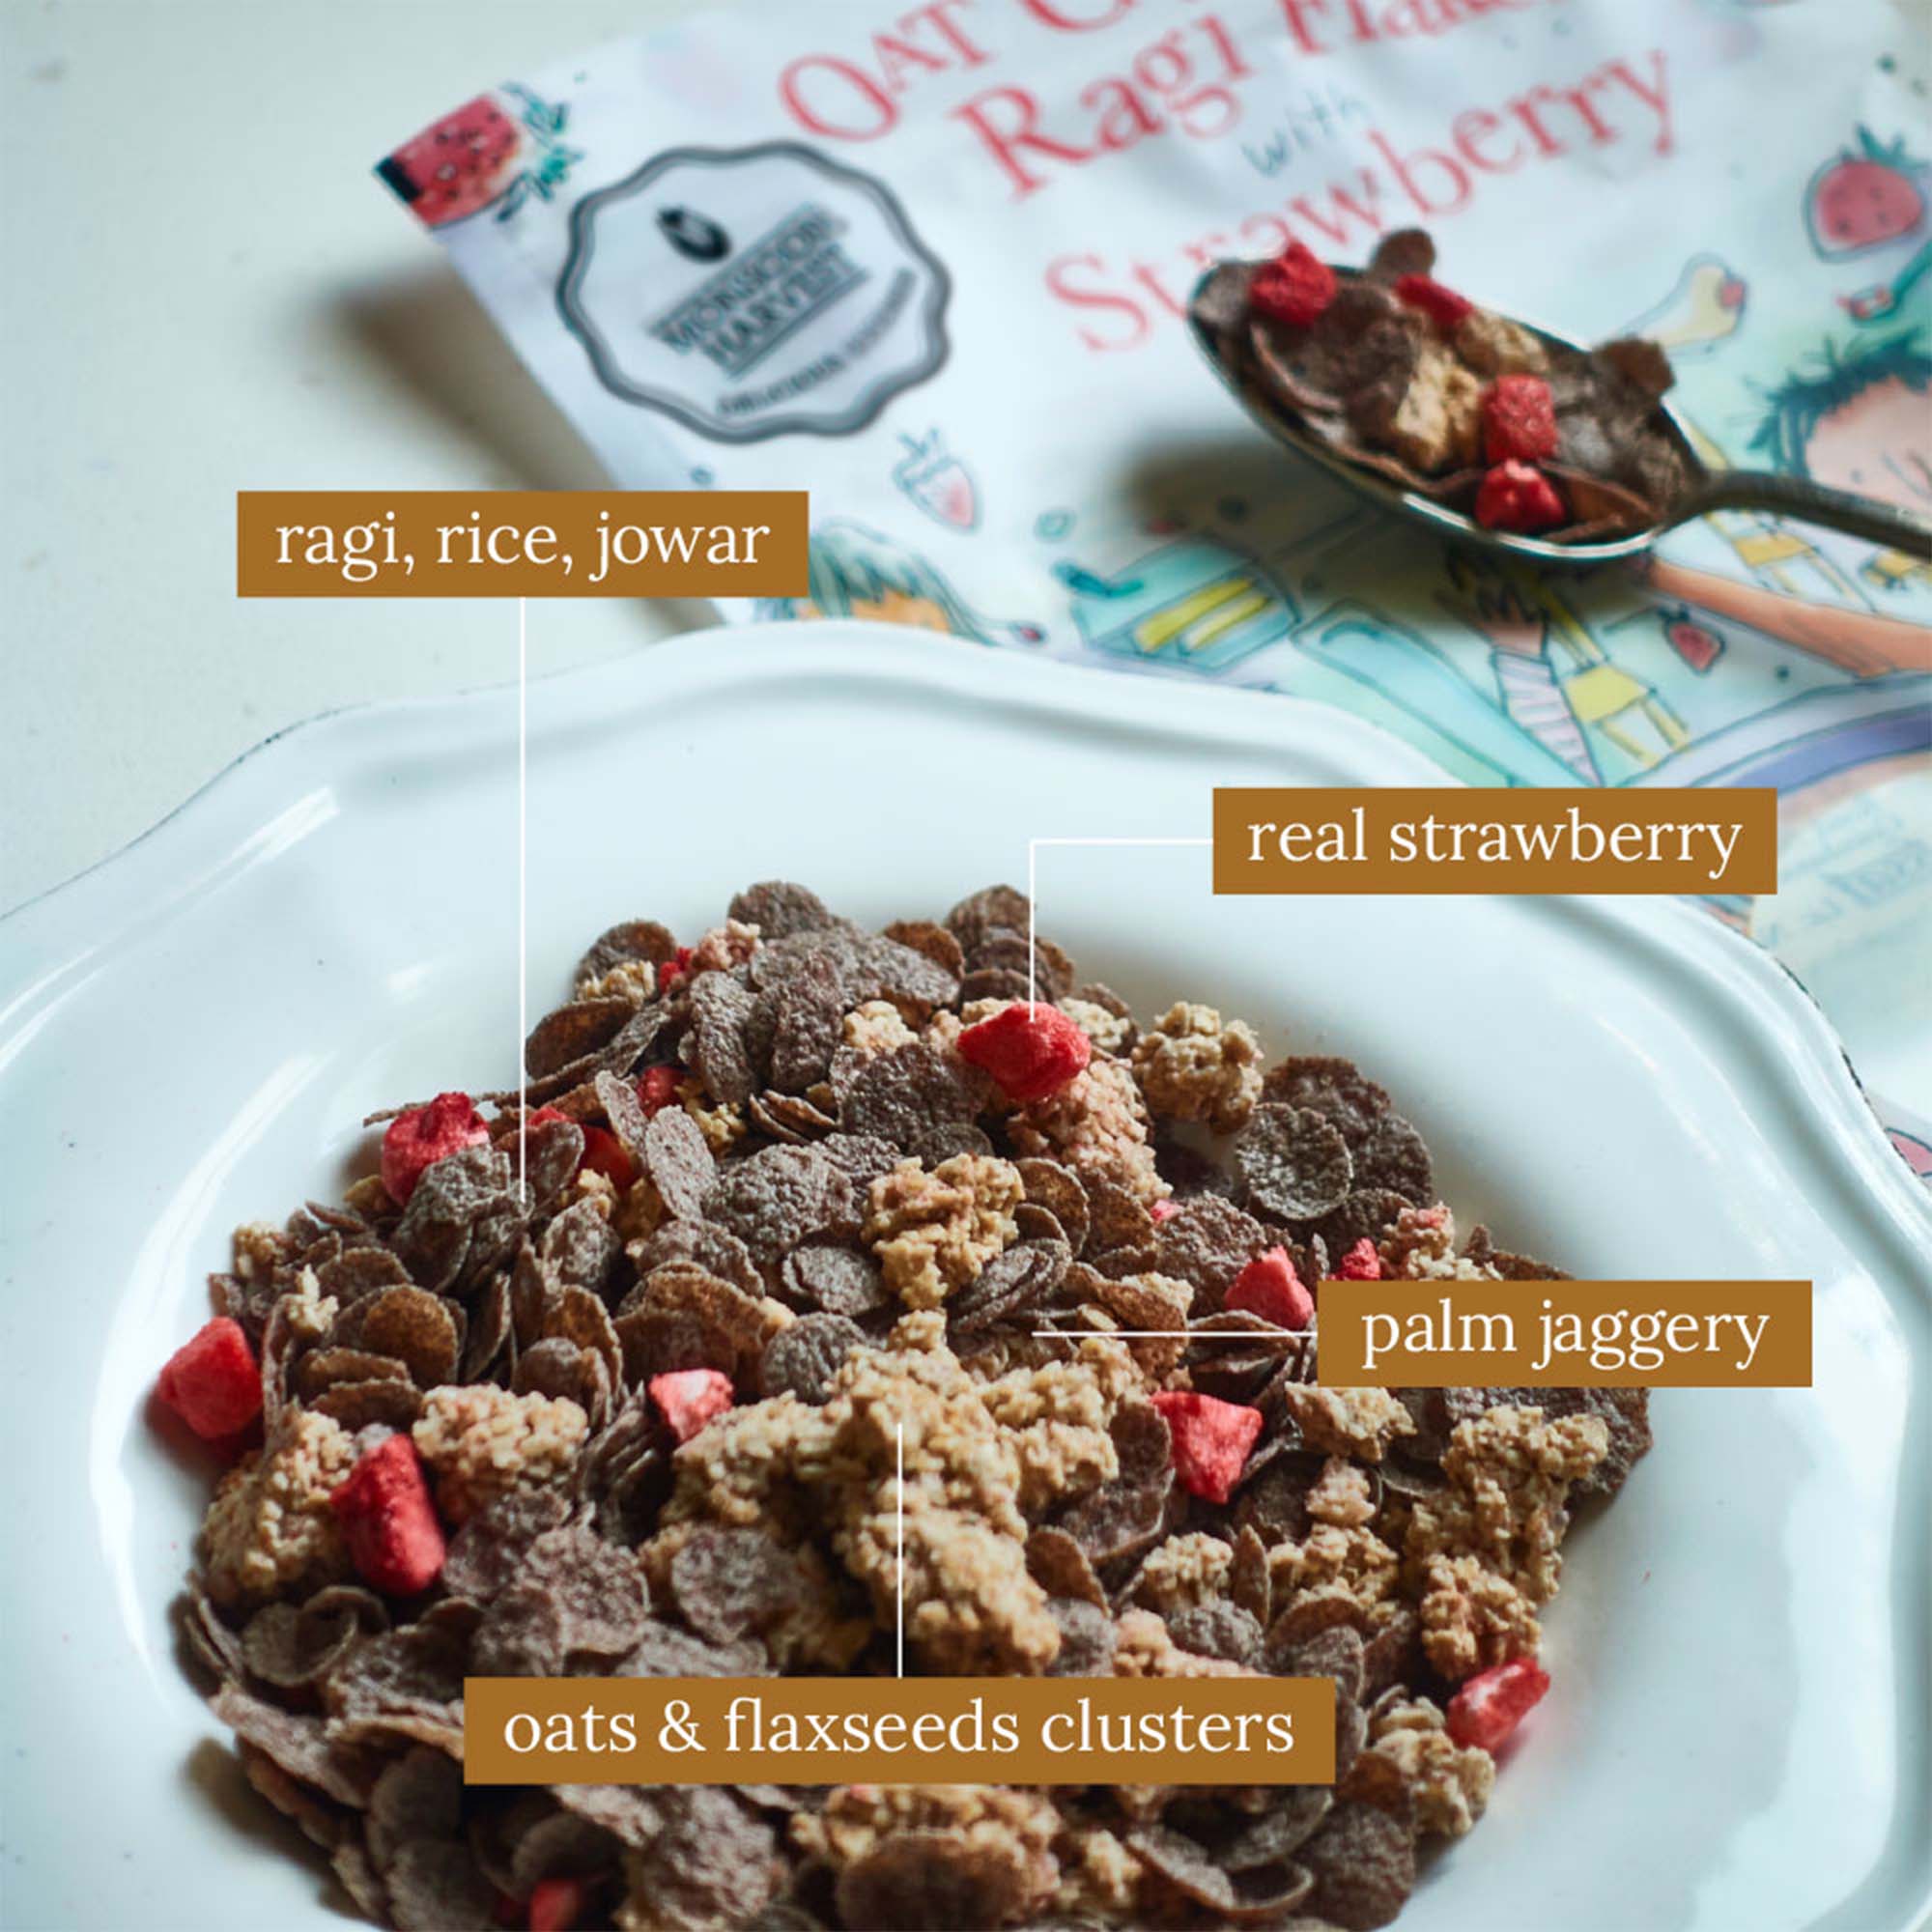 Breakfast Cereal - Oat Clusters & Ragi Flakes with Strawberry - 1KG